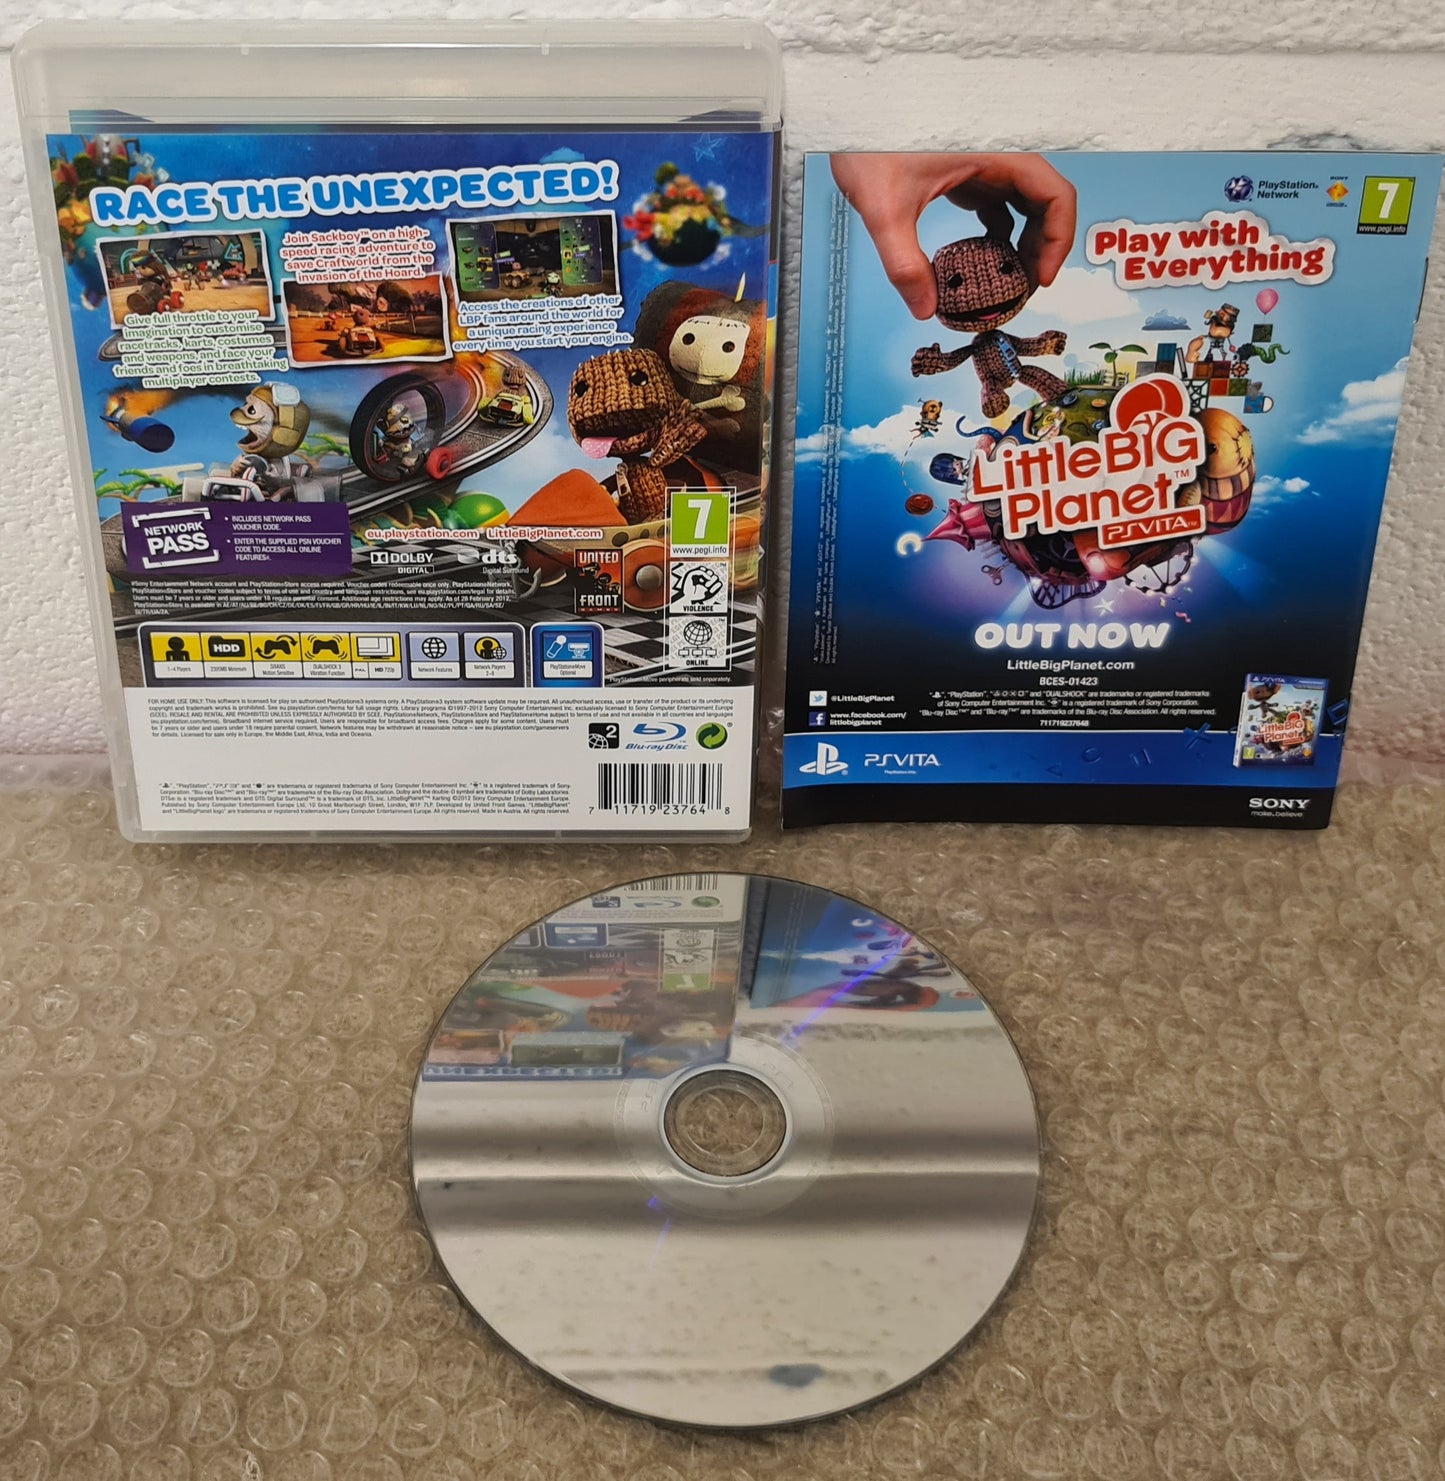 Littlebigplanet Karting Sony Playstation  3 (PS3) Game